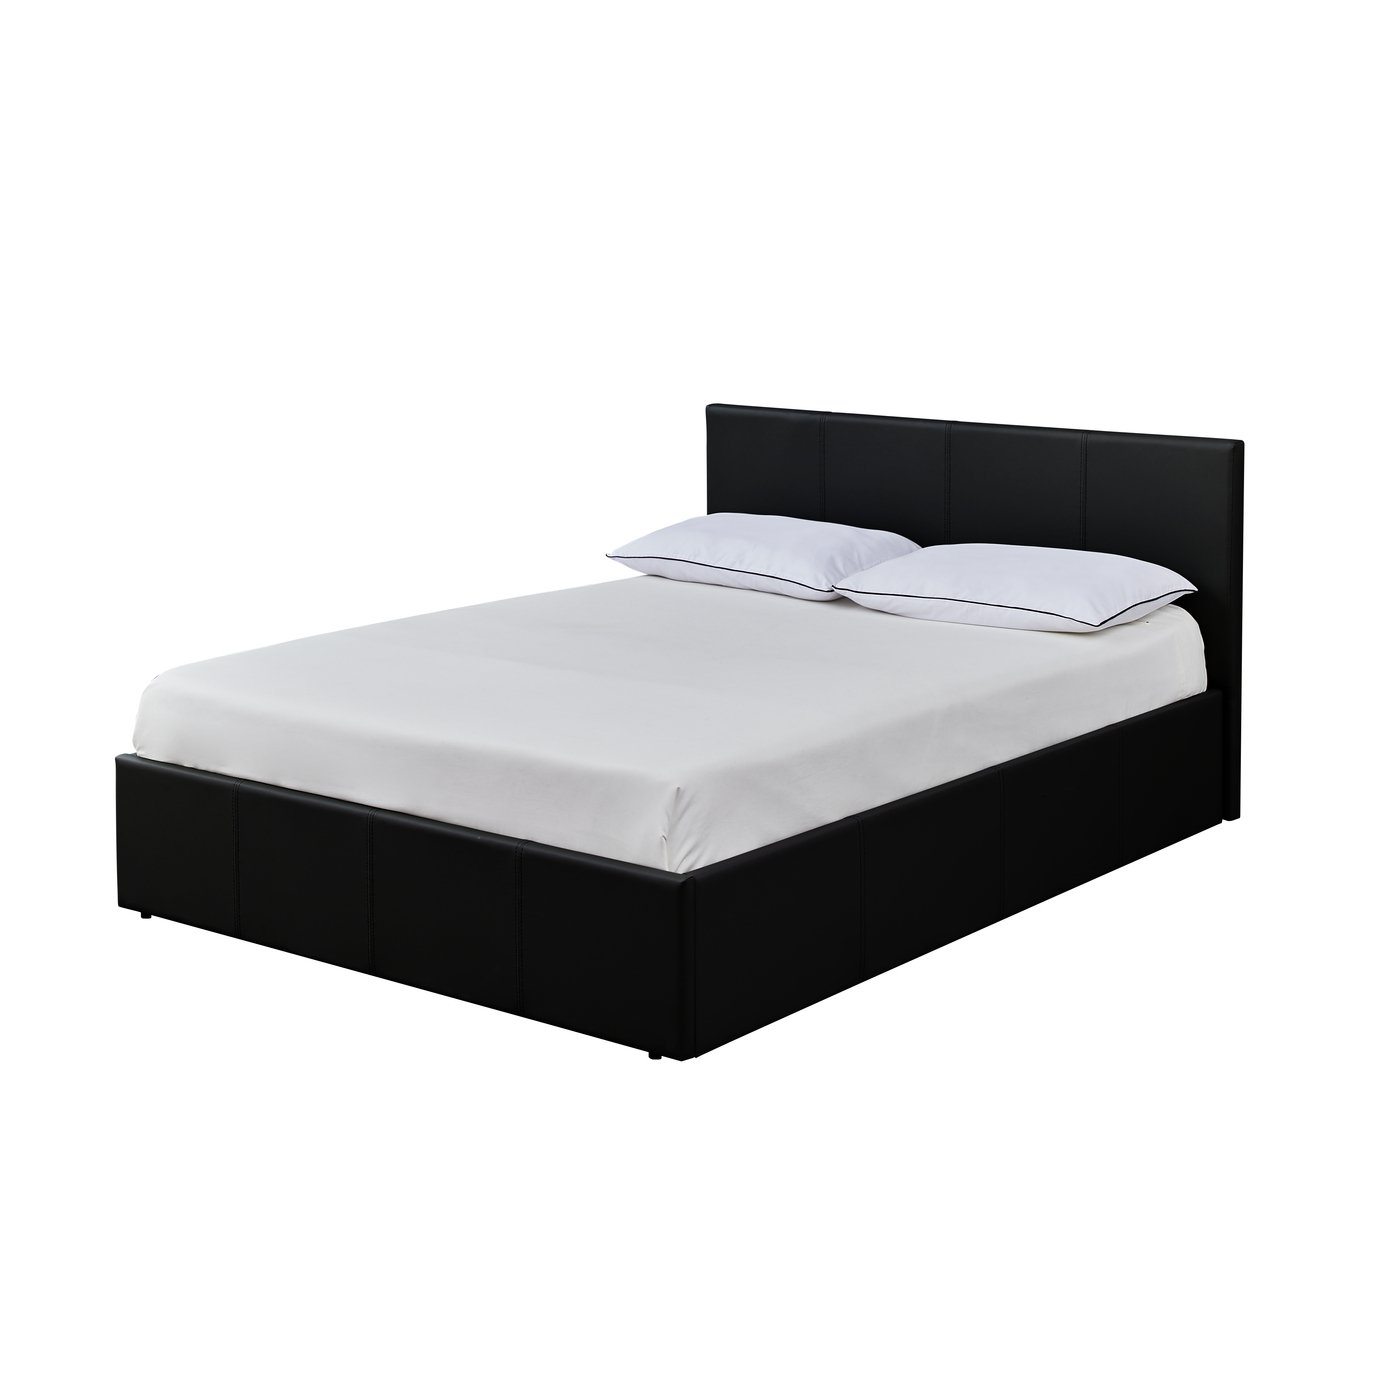 Argos Home Lavendon Small Double End Opening Bed Frame-Black